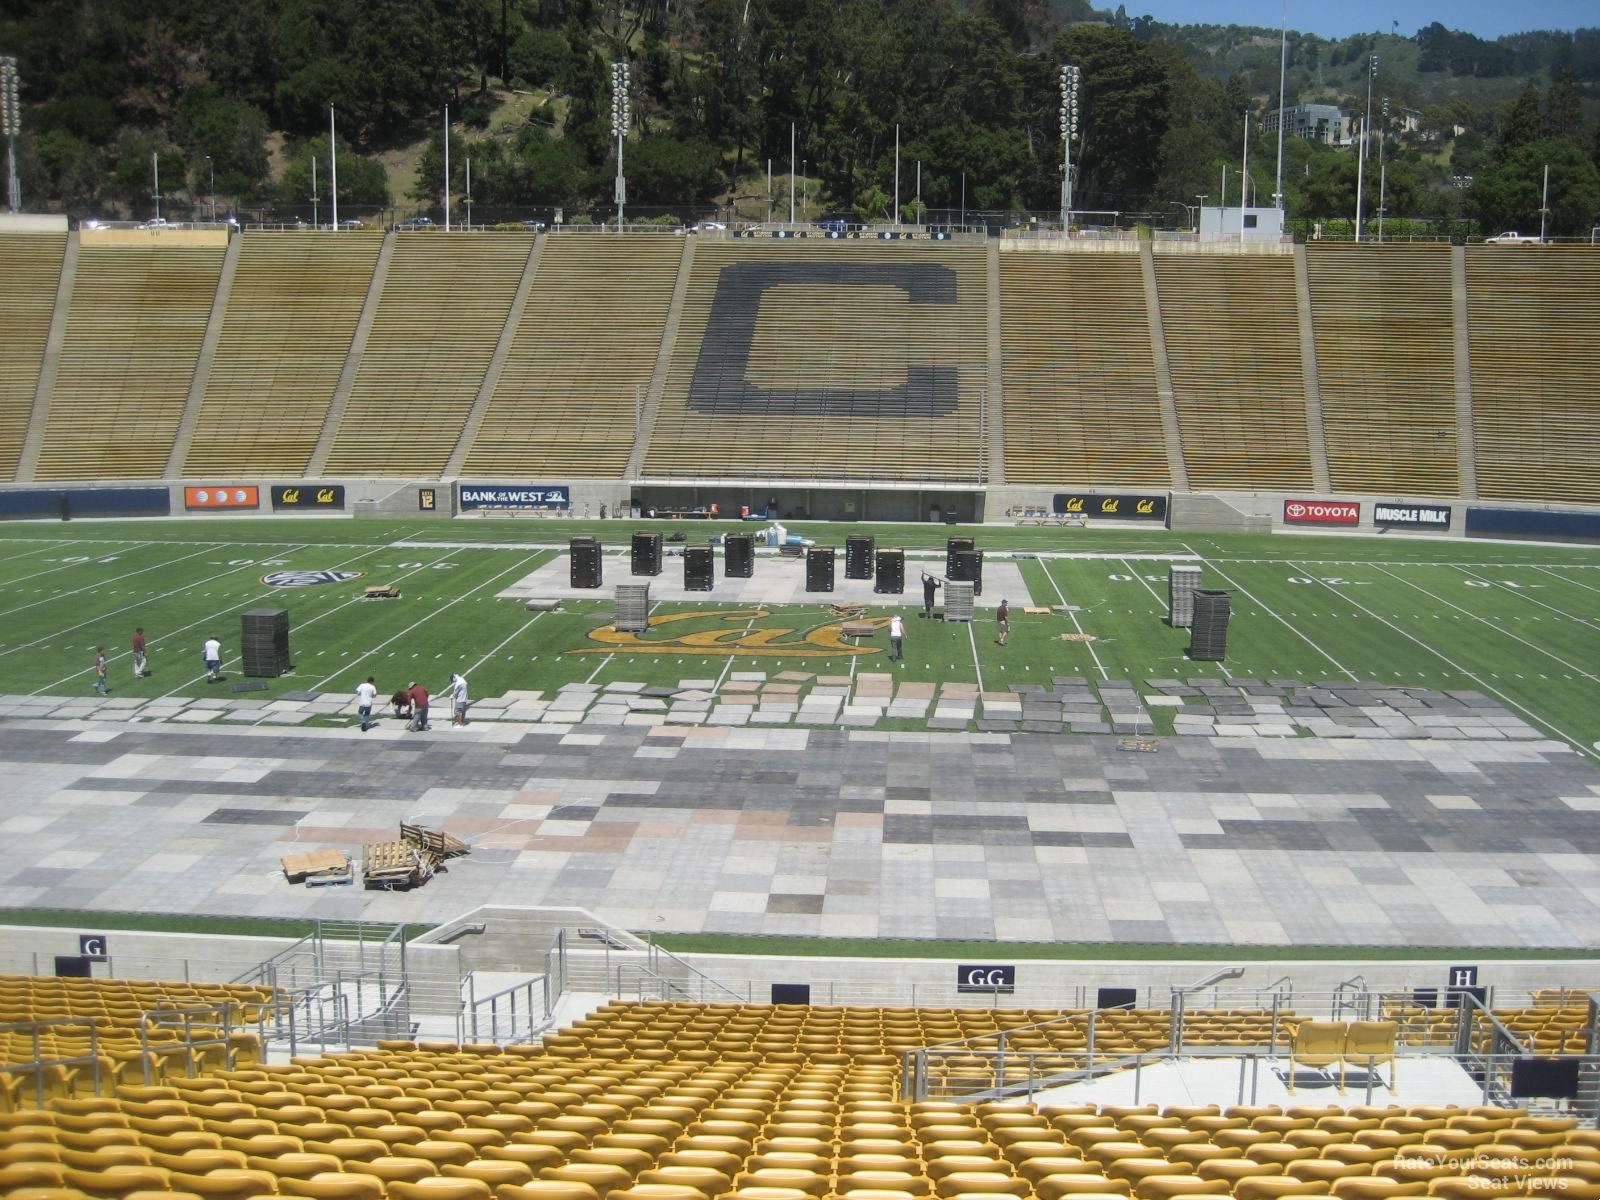 section gg, row 30 seat view  - memorial stadium (cal)